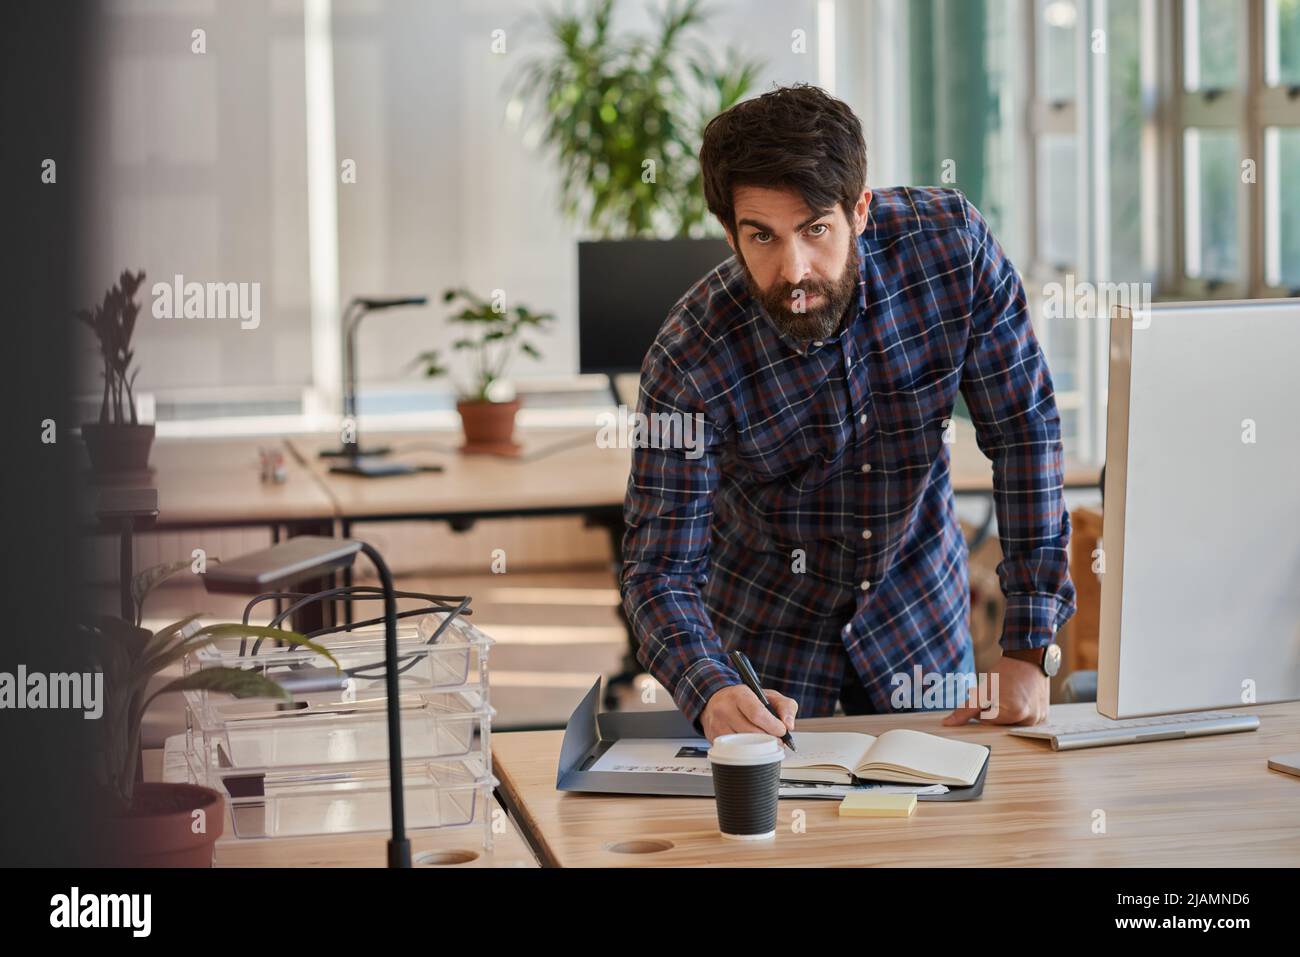 Focused businessman leaning over his desk and writing in a notebook Stock Photo